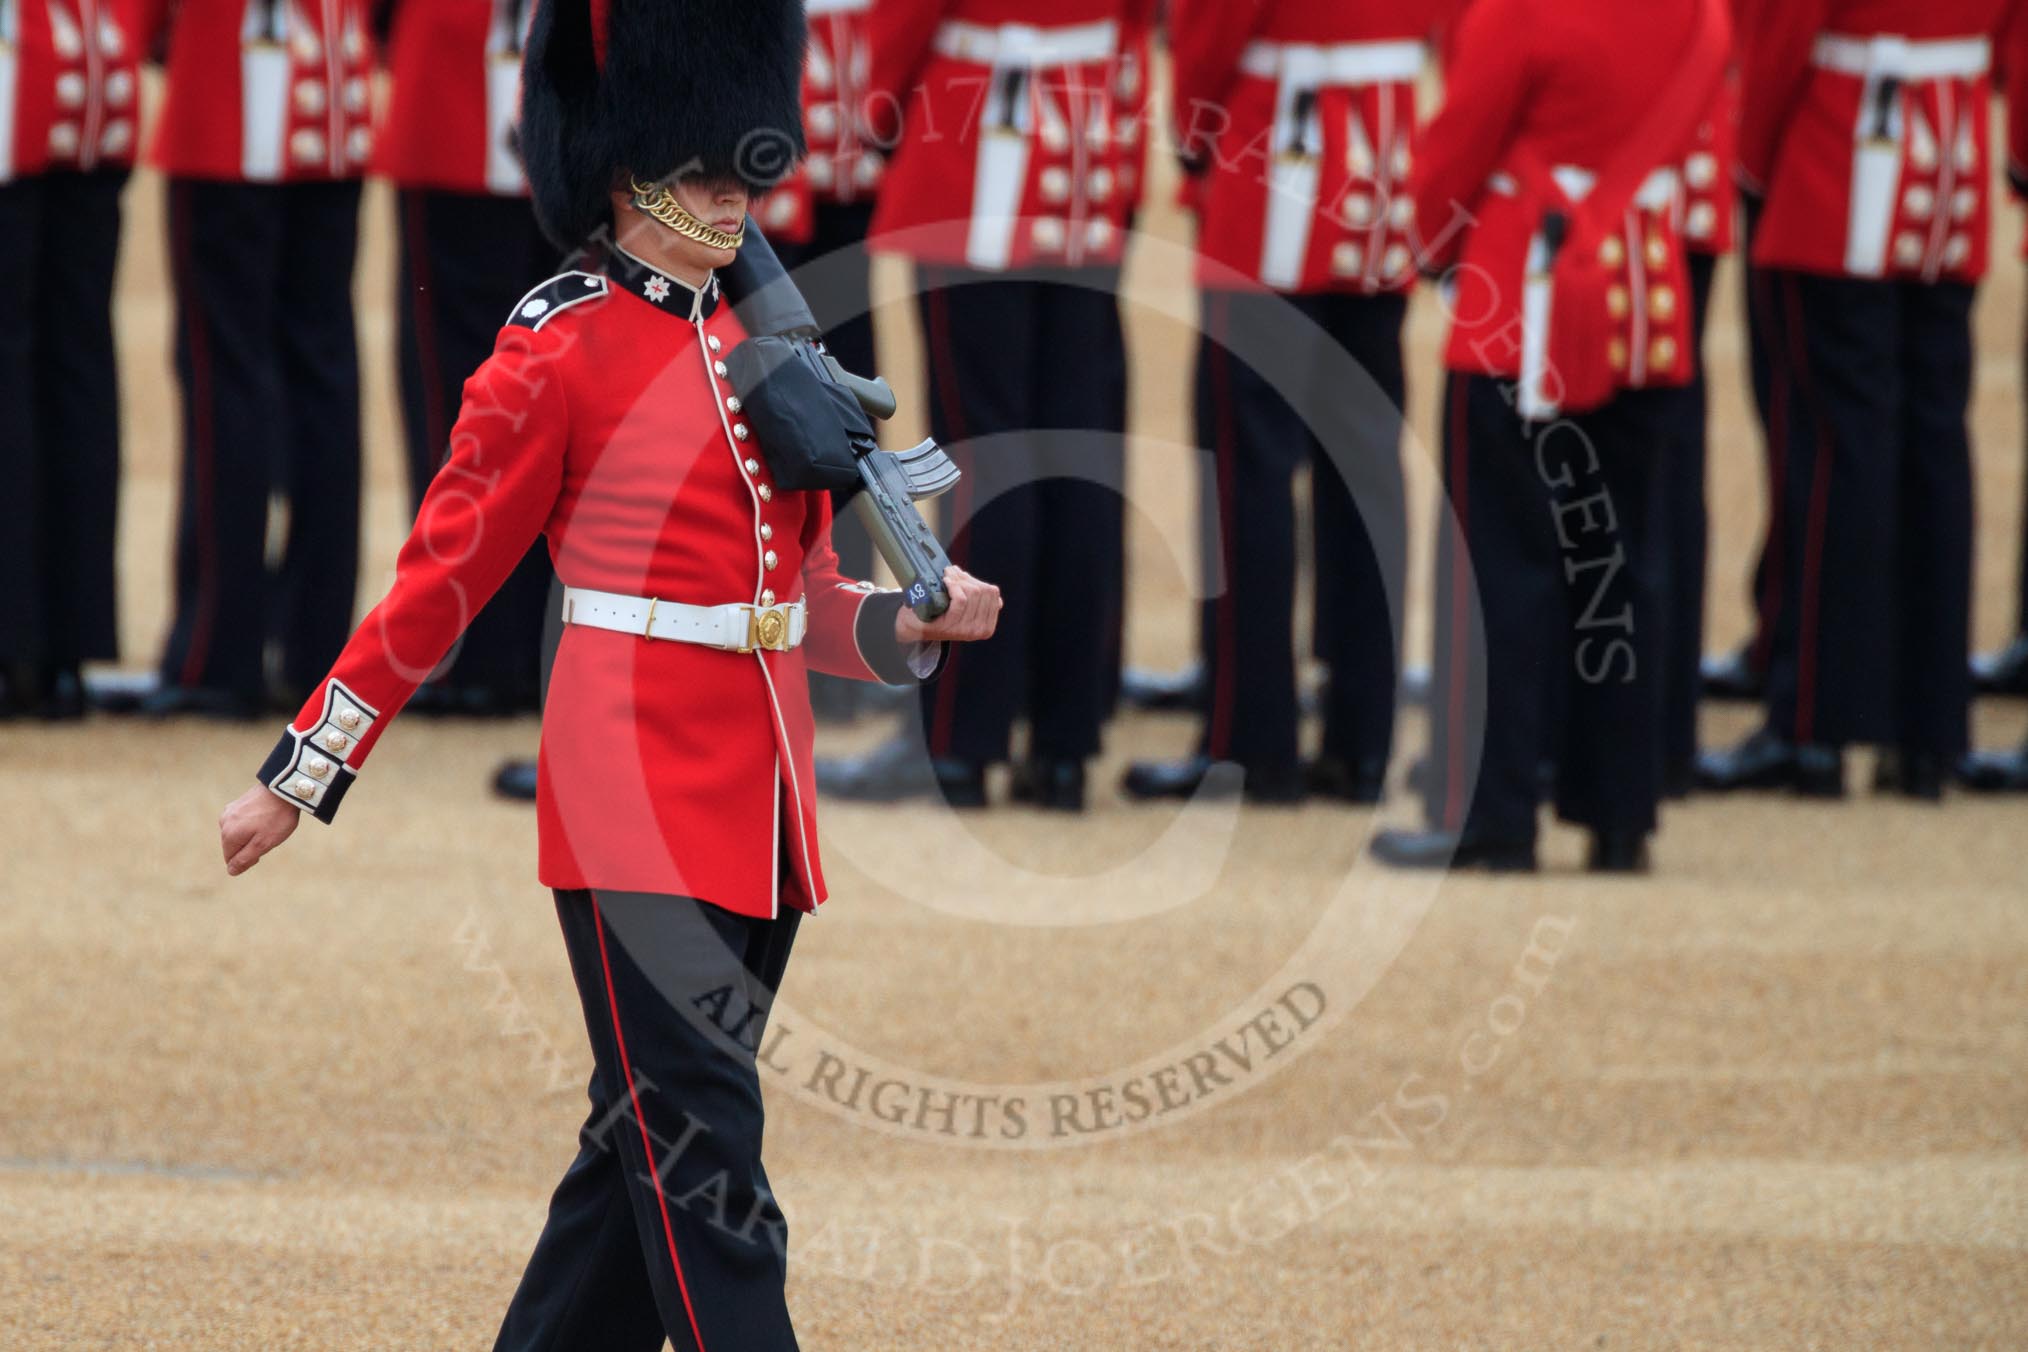 during The Colonel's Review {iptcyear4} (final rehearsal for Trooping the Colour, The Queen's Birthday Parade)  at Horse Guards Parade, Westminster, London, 2 June 2018, 10:34.